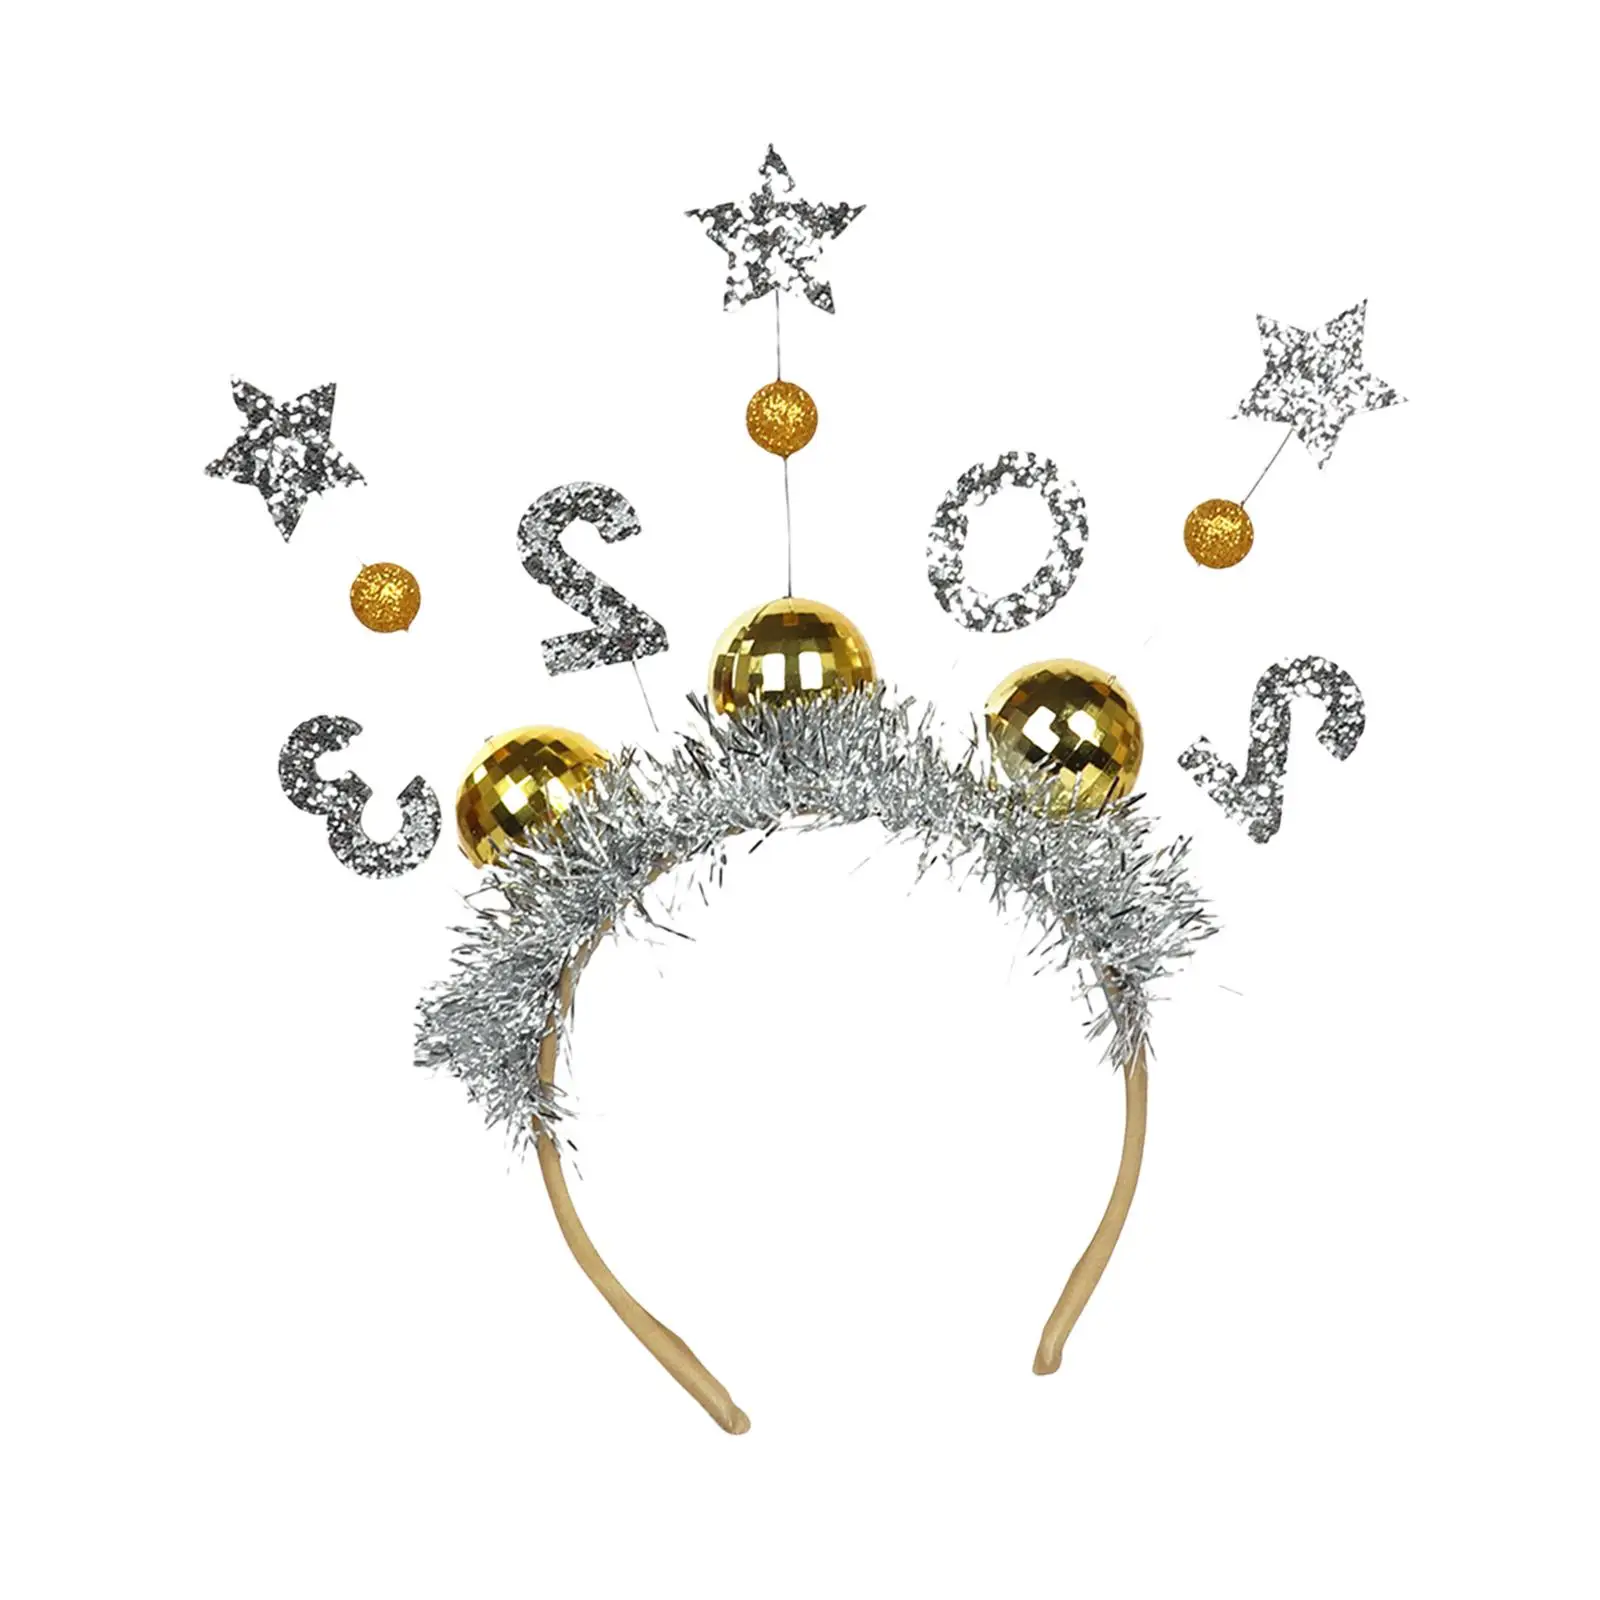 2023 New Year Headband Hair Hoop Tiara Glitter Number Shape Hairbands Hair Accessory for New Year Eve Party Favors Supplies Men